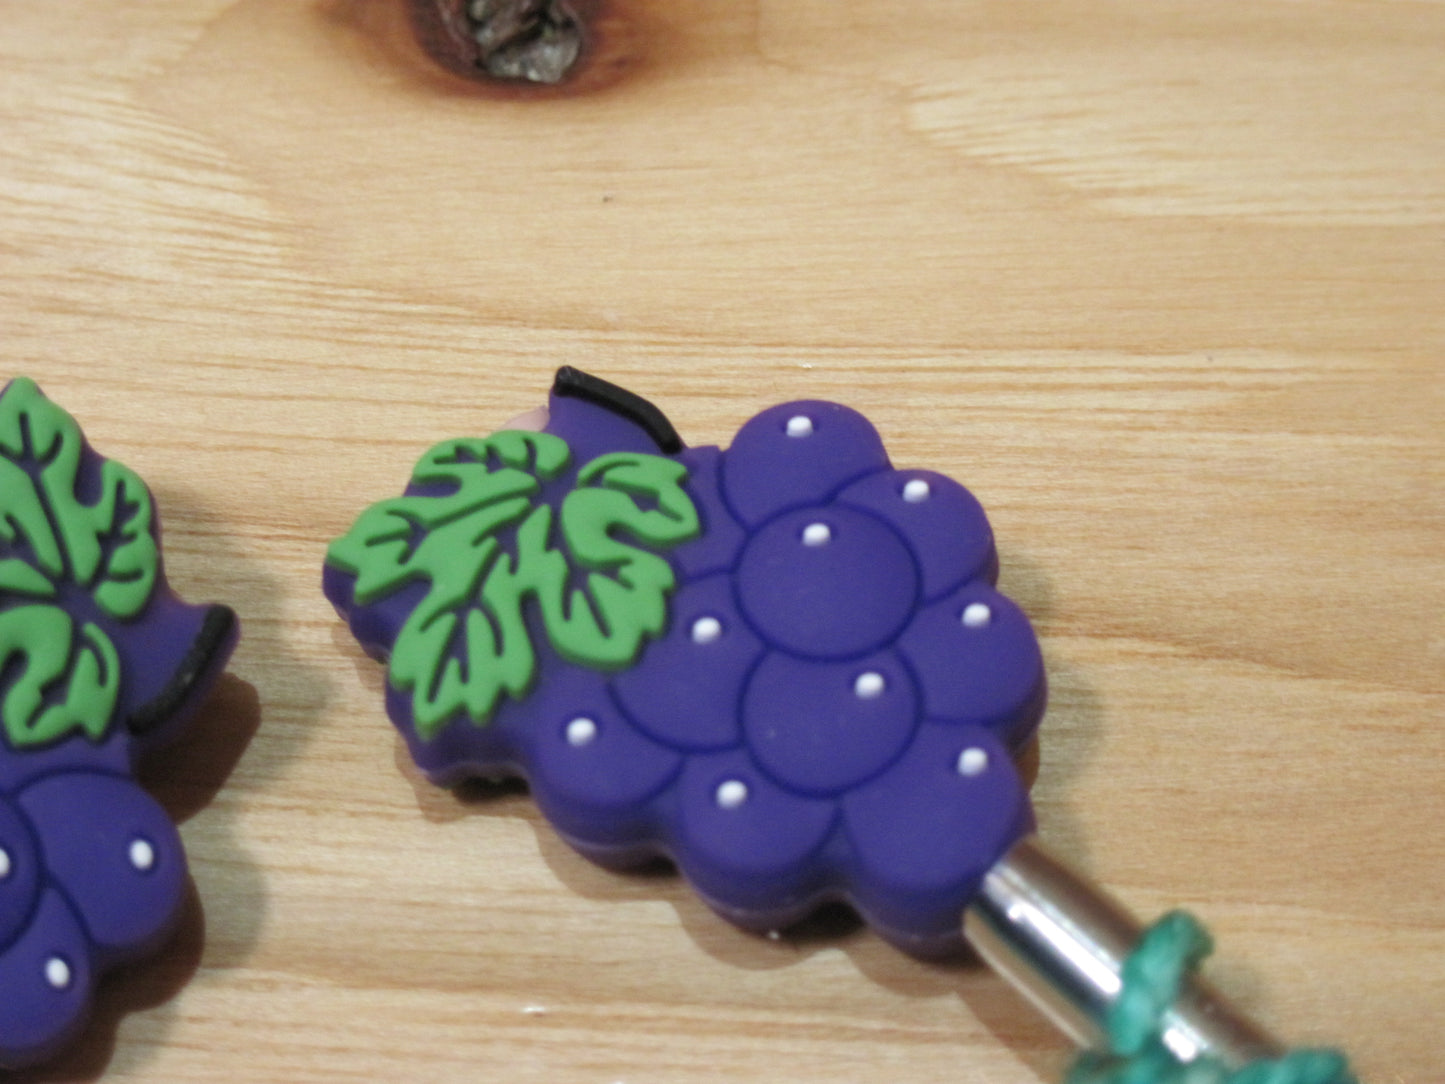 Grapes ~ Stitch Stoppers